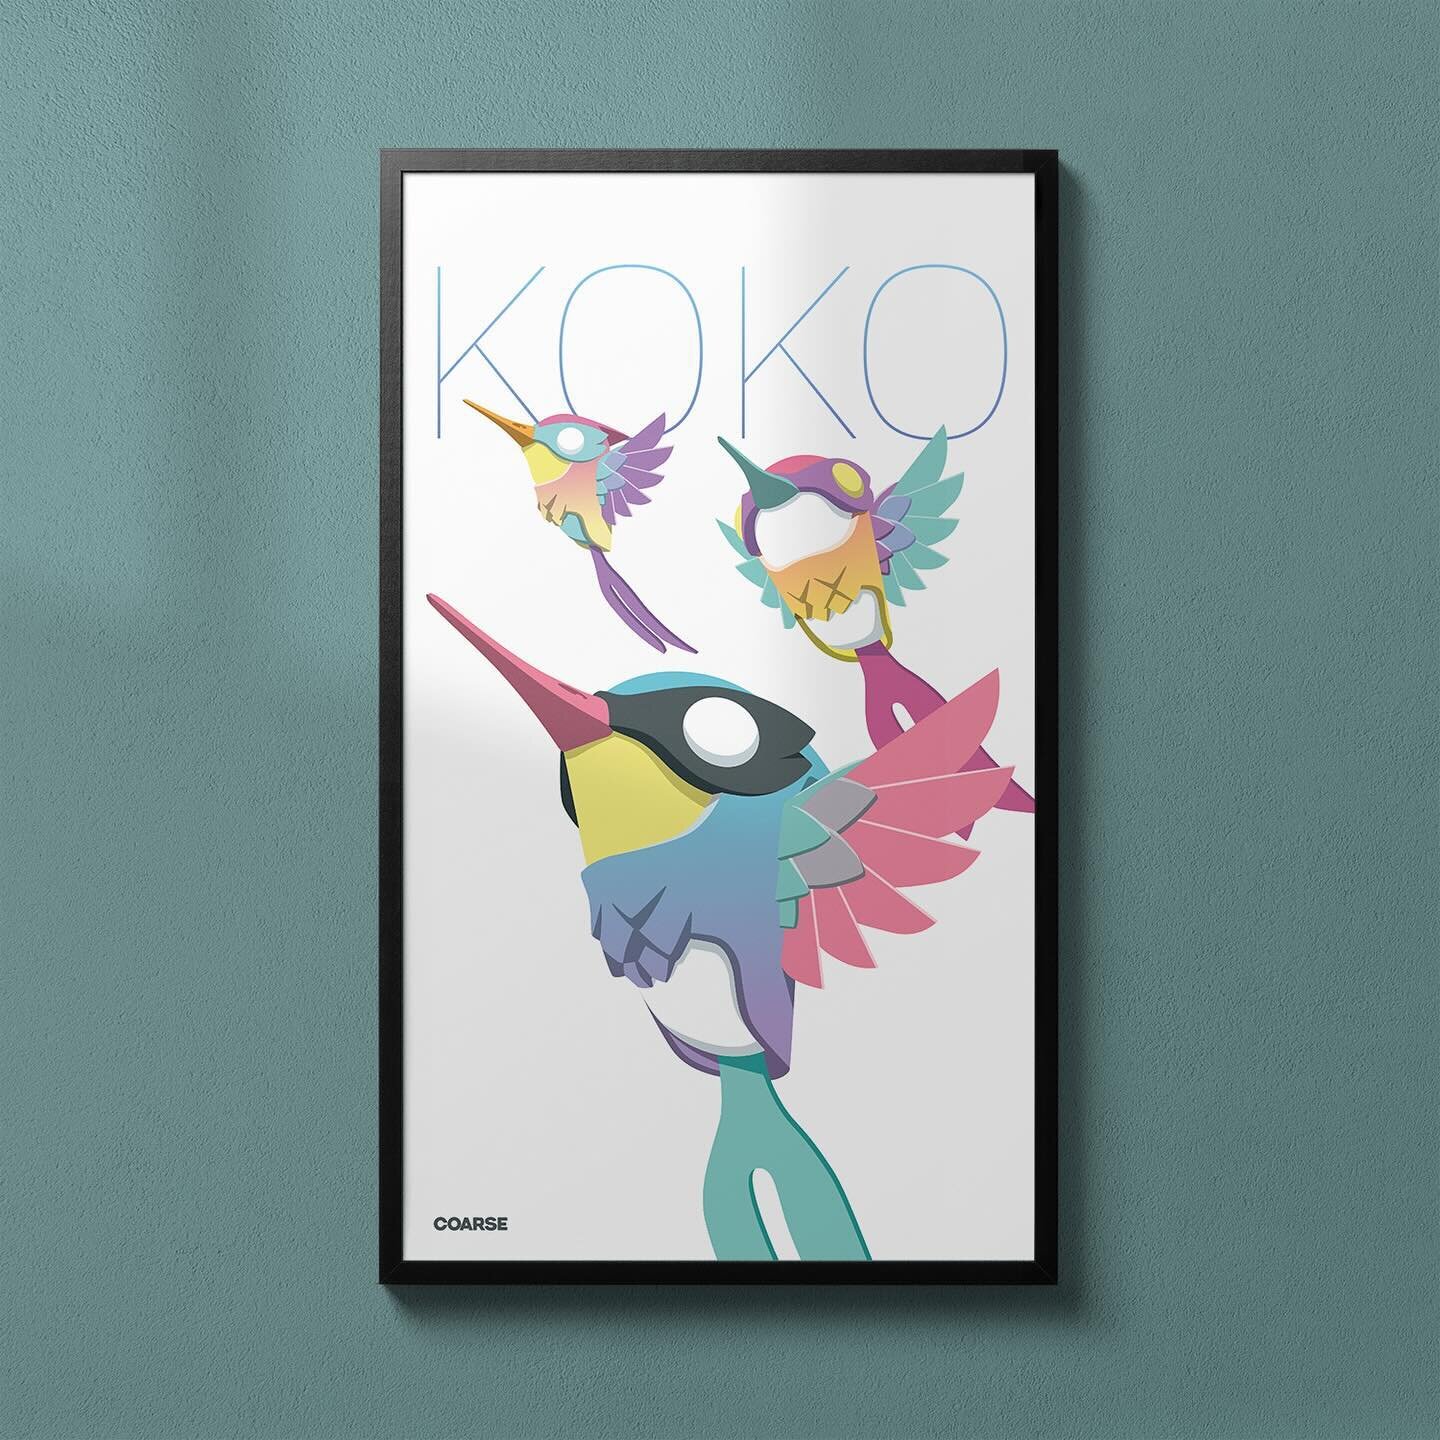 TTE &rsquo;24 Artist signing times: Daily (Friday &ndash; Sunday): 2:00 pm &ndash; 7:00 pm

Free KOKO posters available (as long as supplies last)

====

KOKO 
6&rsquo;&rsquo; and 4&rsquo;&rsquo; vinyl sculptures 
Available today in limited quantitie